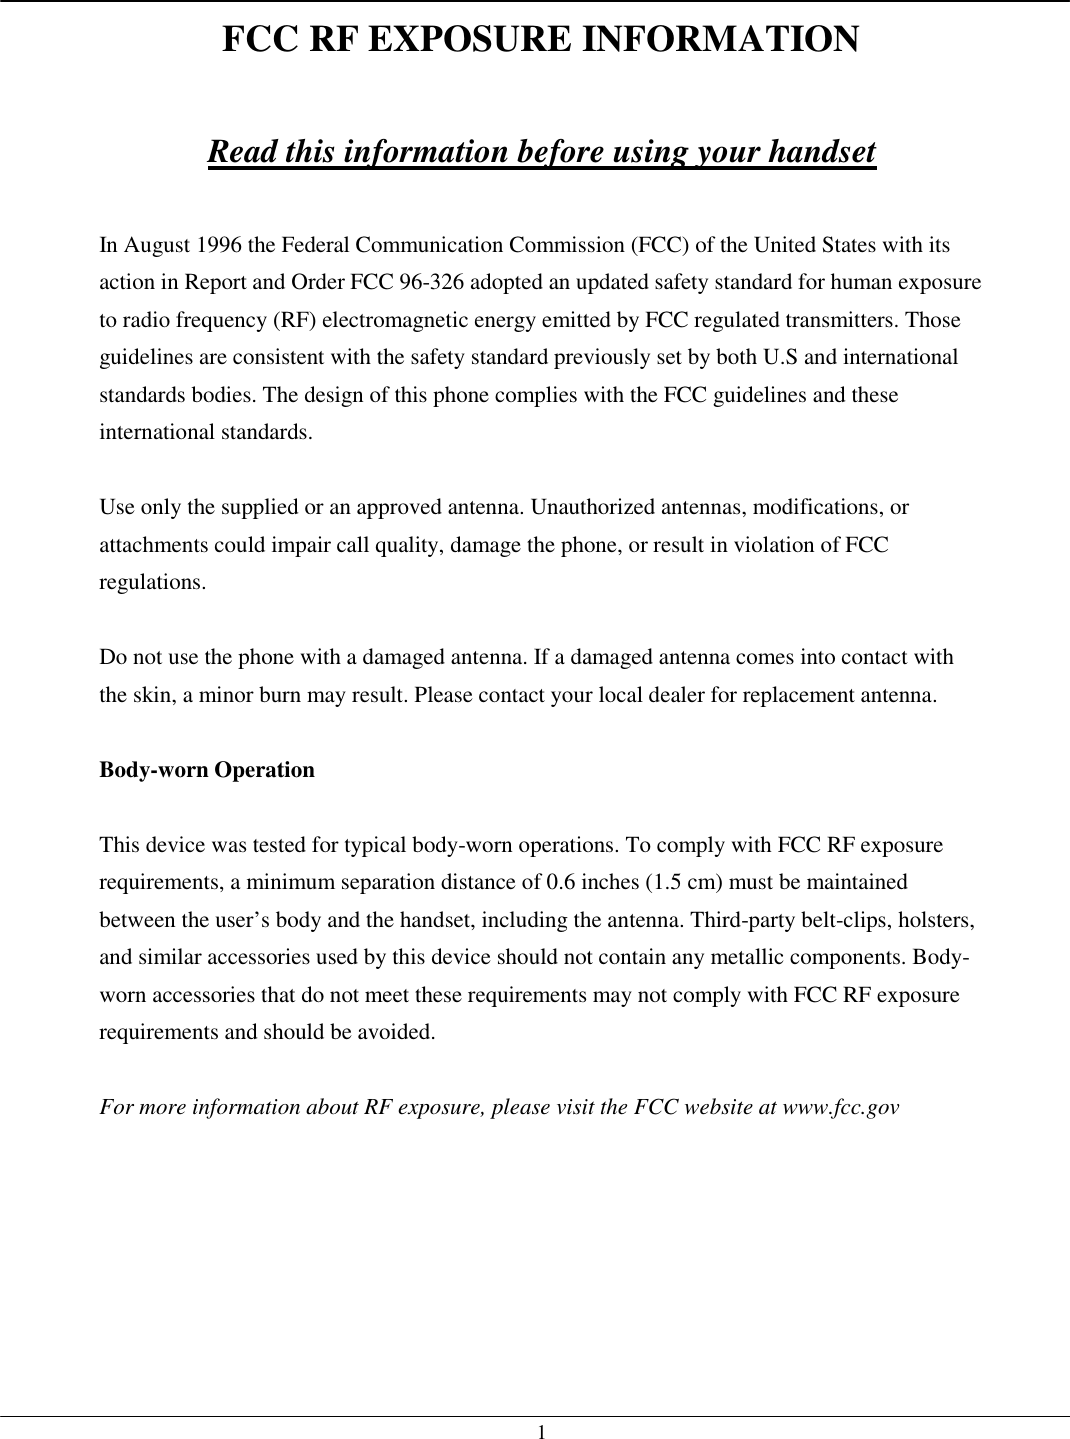   1FCC RF EXPOSURE INFORMATION  Read this information before using your handset  In August 1996 the Federal Communication Commission (FCC) of the United States with its action in Report and Order FCC 96-326 adopted an updated safety standard for human exposure to radio frequency (RF) electromagnetic energy emitted by FCC regulated transmitters. Those guidelines are consistent with the safety standard previously set by both U.S and international standards bodies. The design of this phone complies with the FCC guidelines and these international standards.  Use only the supplied or an approved antenna. Unauthorized antennas, modifications, or attachments could impair call quality, damage the phone, or result in violation of FCC regulations.  Do not use the phone with a damaged antenna. If a damaged antenna comes into contact with the skin, a minor burn may result. Please contact your local dealer for replacement antenna.  Body-worn Operation  This device was tested for typical body-worn operations. To comply with FCC RF exposure requirements, a minimum separation distance of 0.6 inches (1.5 cm) must be maintained between the user’s body and the handset, including the antenna. Third-party belt-clips, holsters, and similar accessories used by this device should not contain any metallic components. Body-worn accessories that do not meet these requirements may not comply with FCC RF exposure requirements and should be avoided.  For more information about RF exposure, please visit the FCC website at www.fcc.gov    